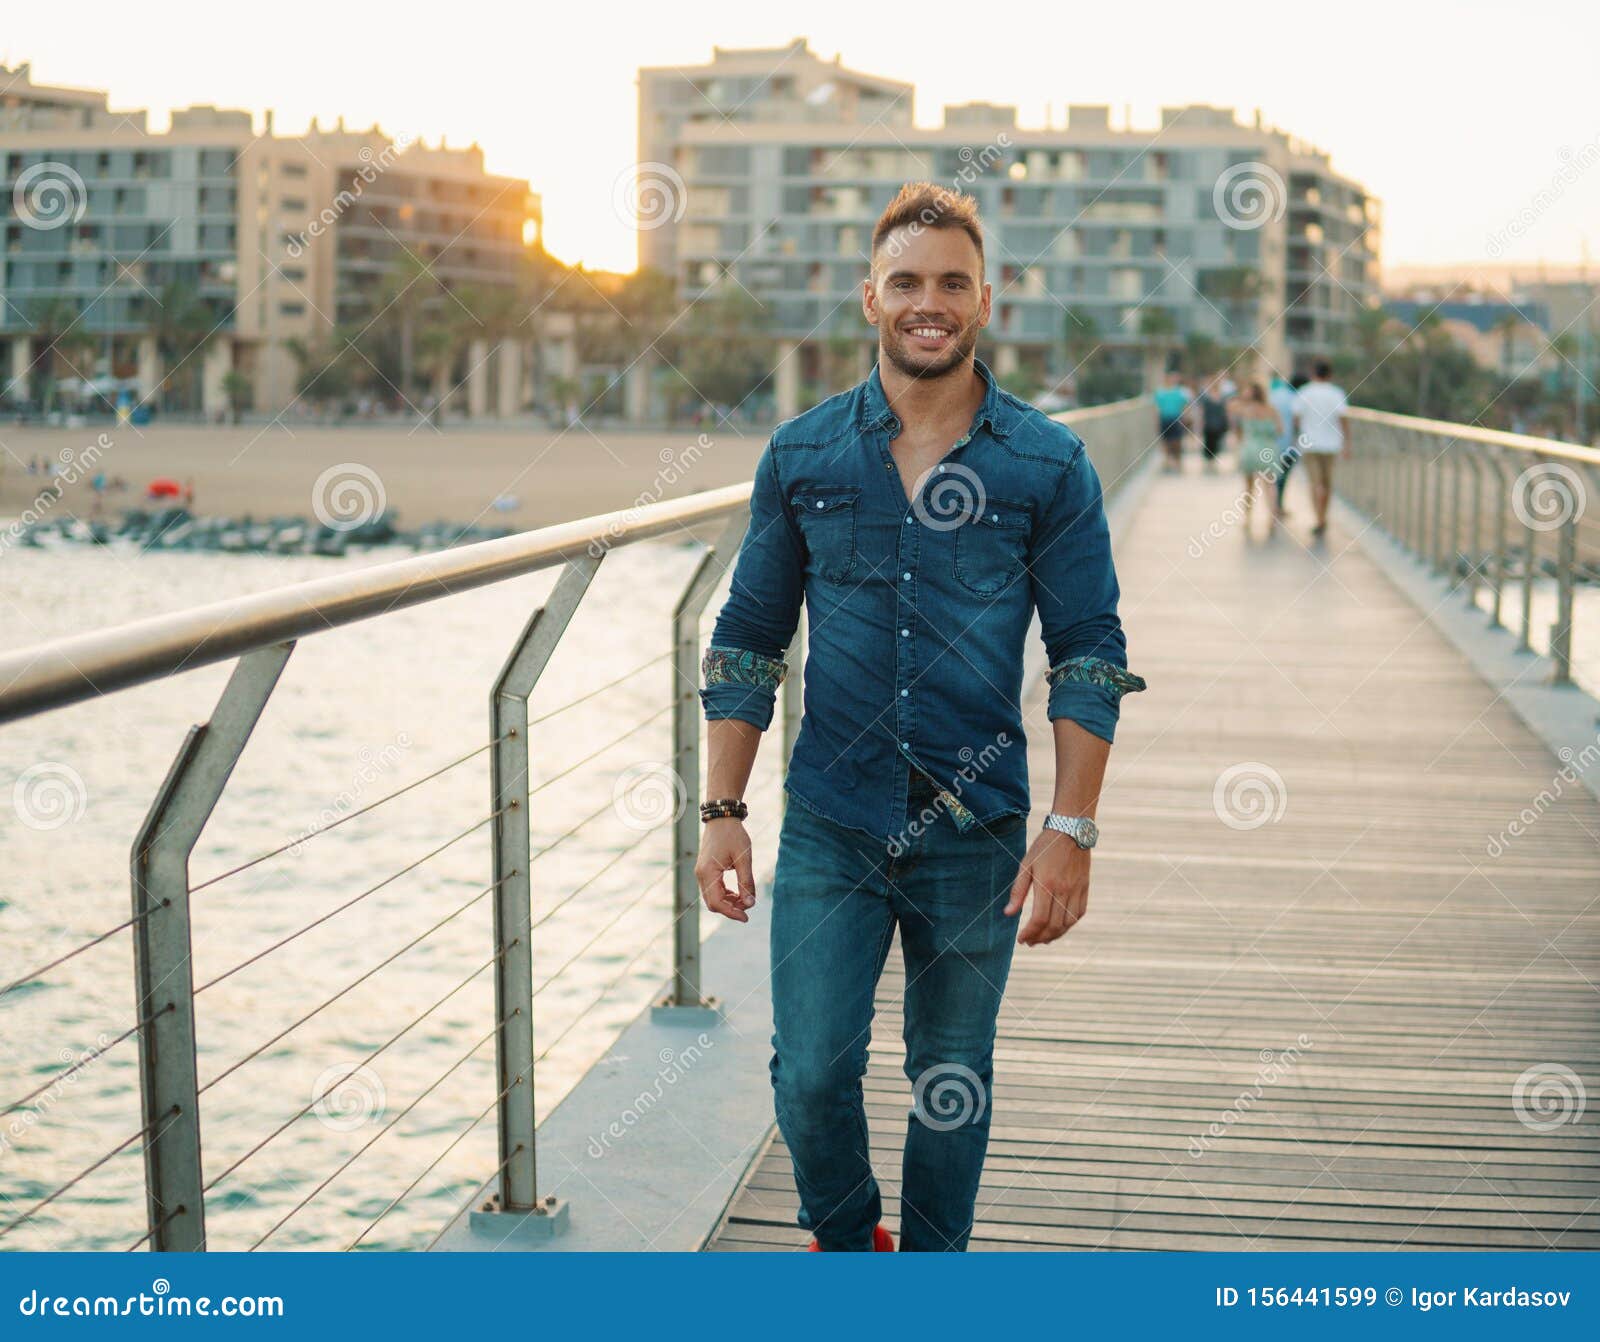 A Young Handsome Man on the Bridge Near Beautiful Beach. Stock Image ...